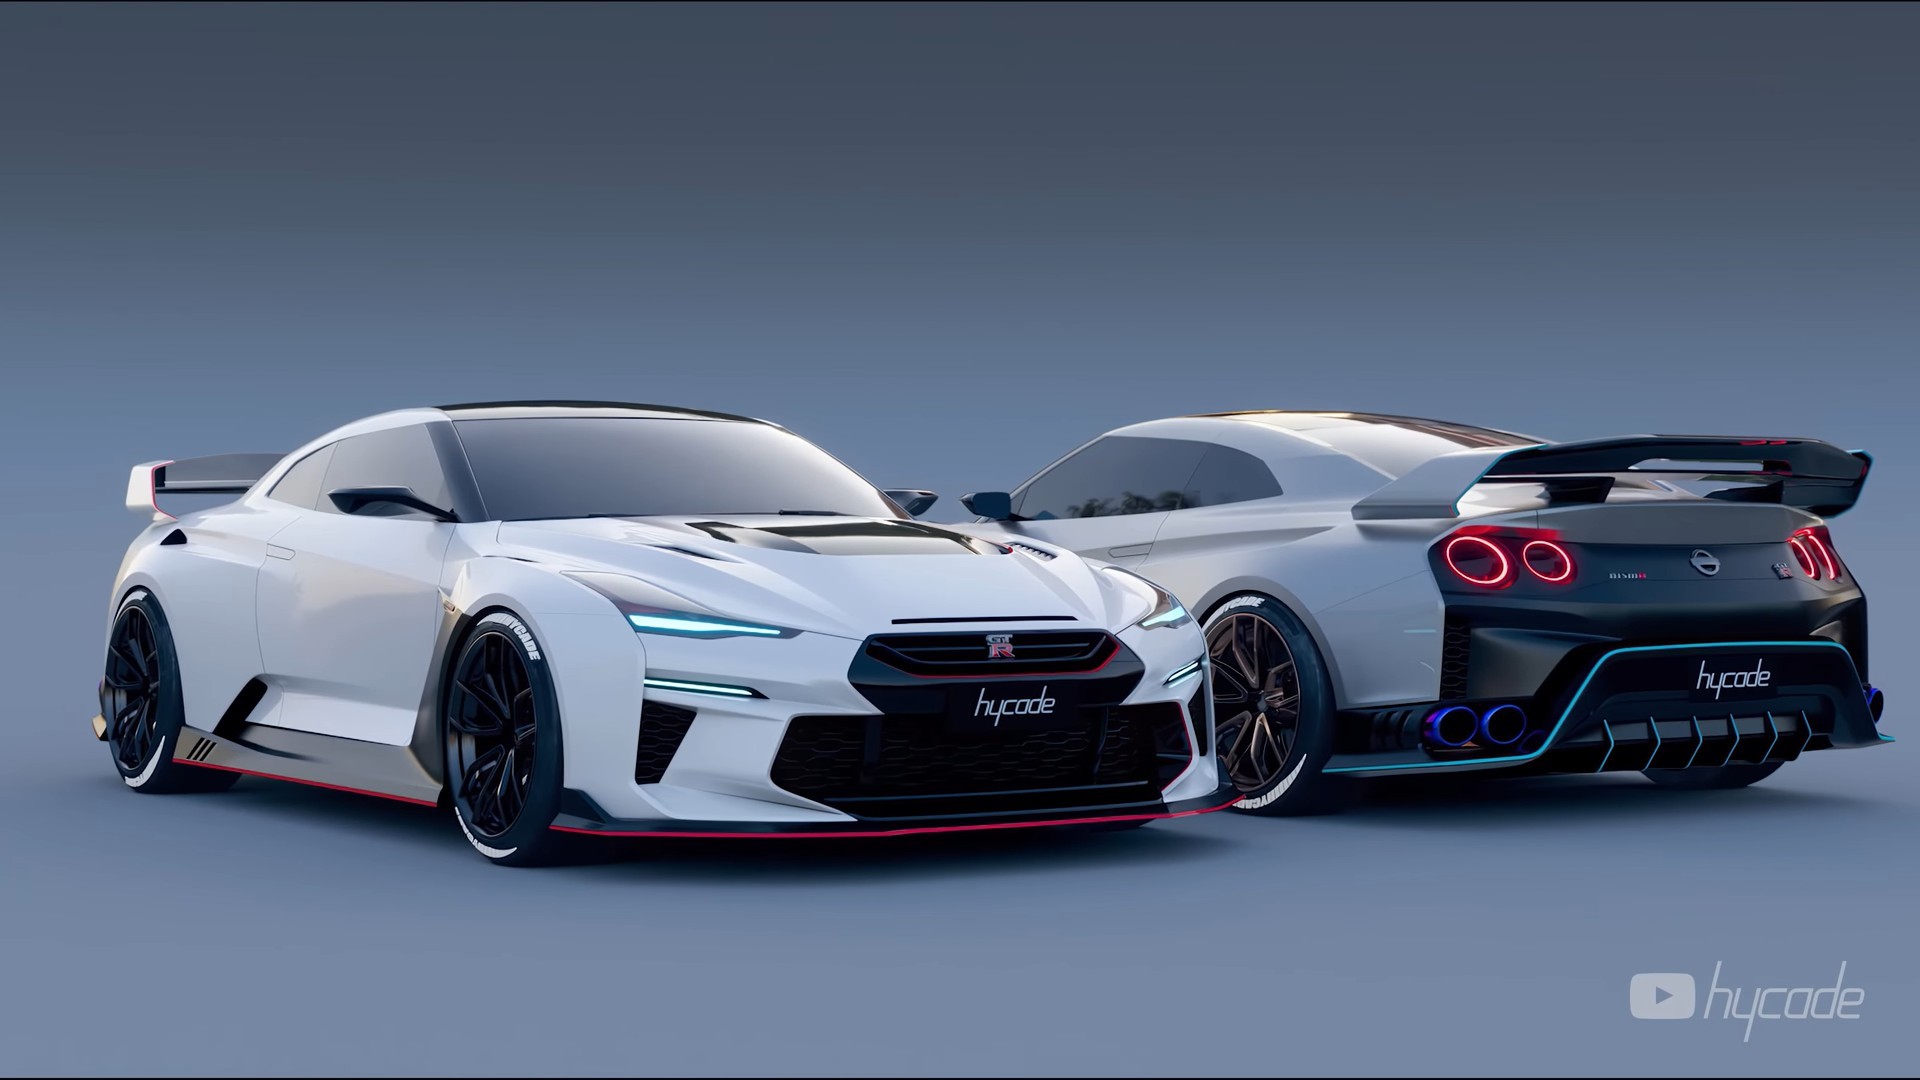 This Nissan GT-R R36 NISMO Render Suggests A Bright Future For The